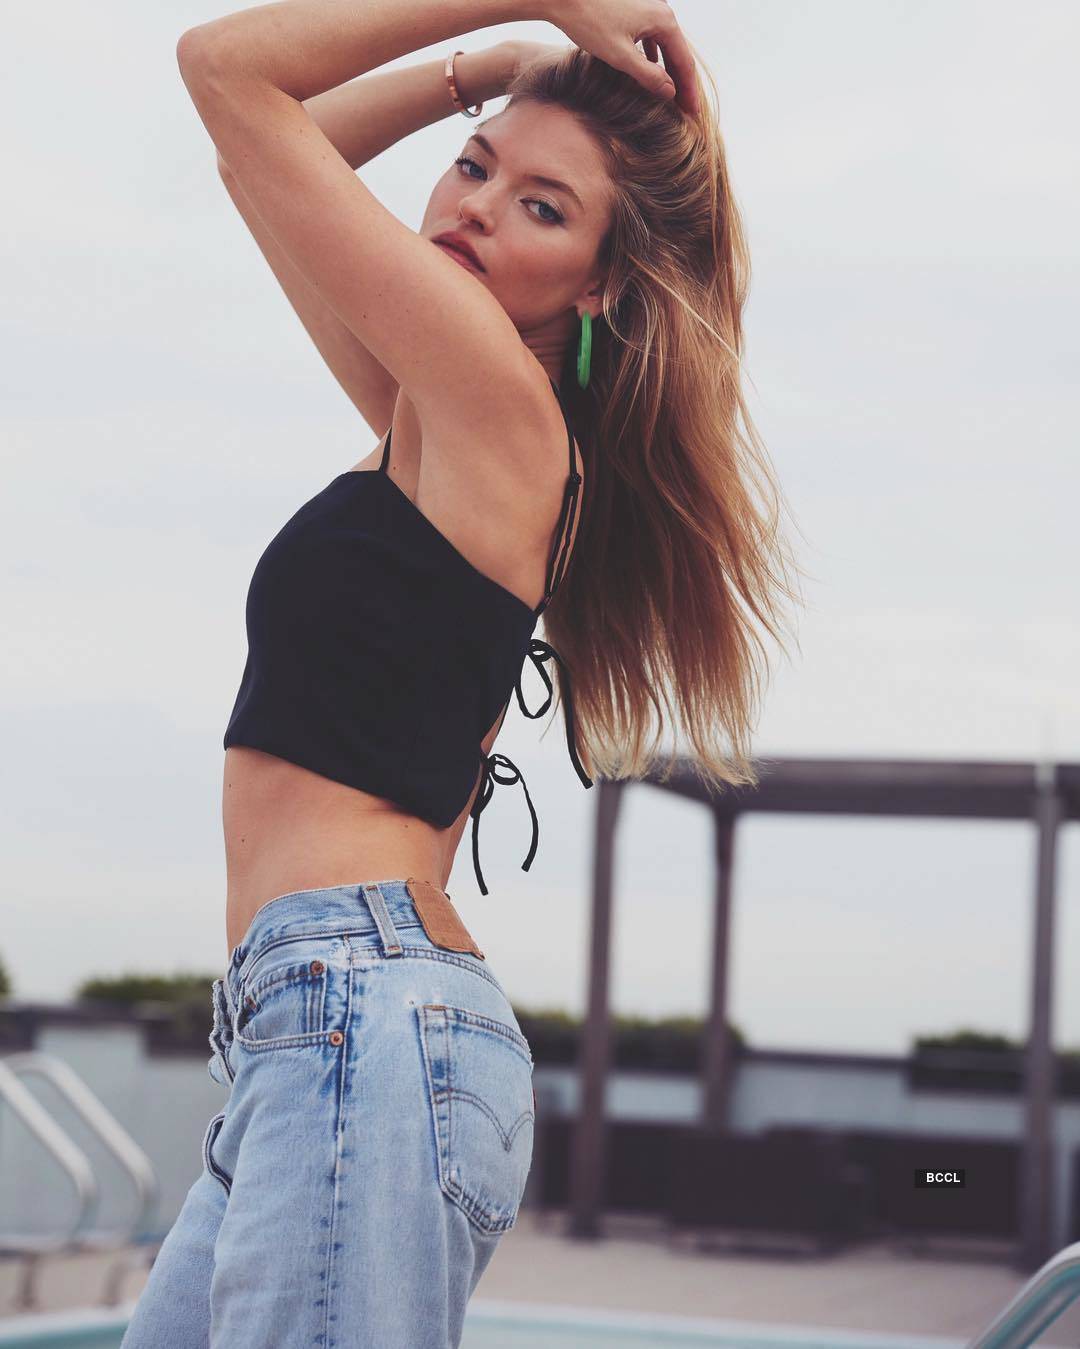 Scoliosis never stopped Martha Hunt from dreaming